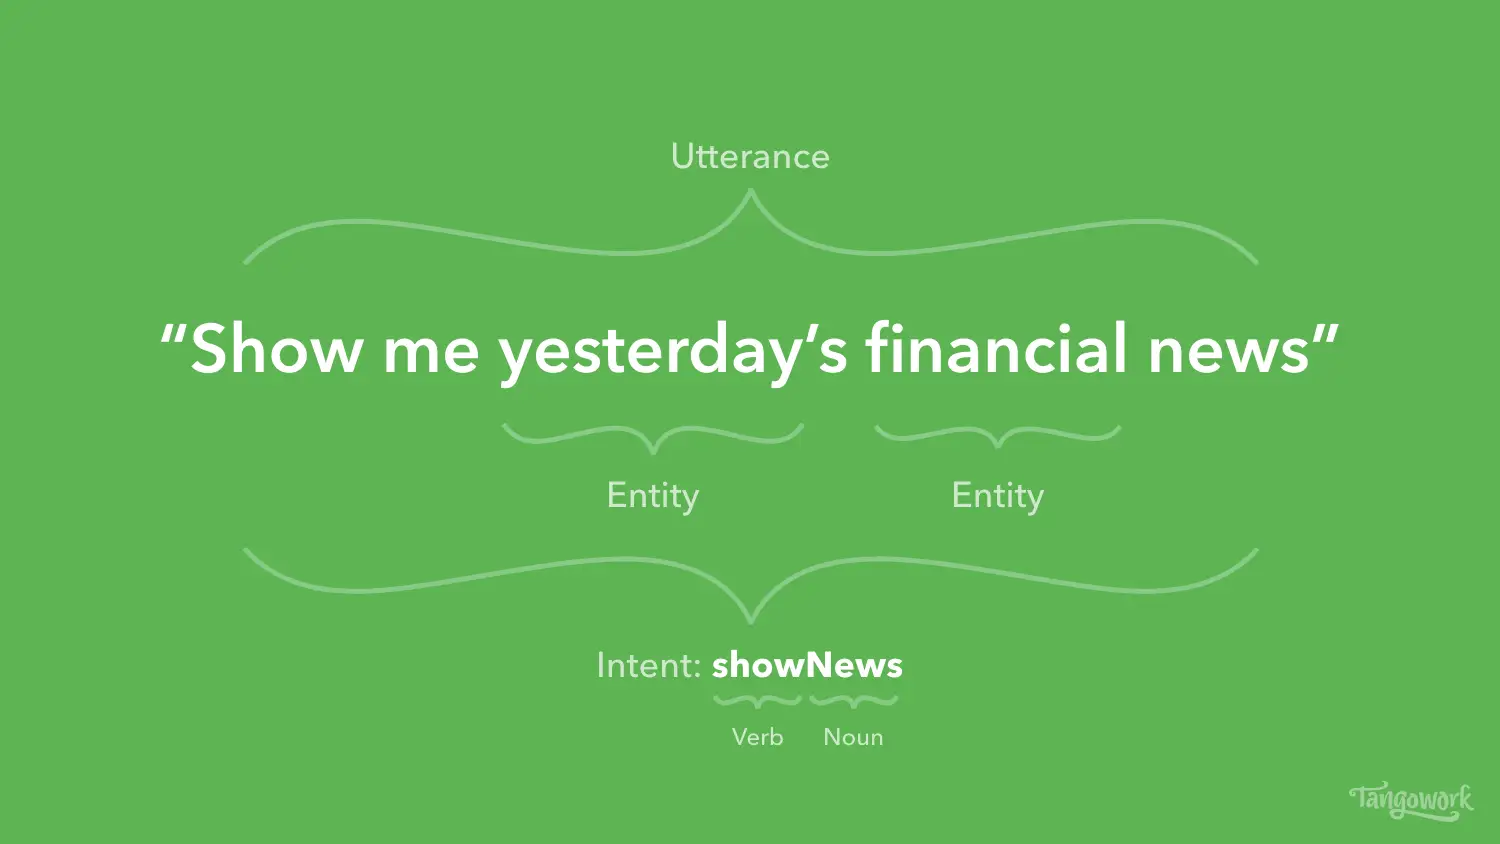 Example utterance for a chatbot "Show me yesterday's financial news"